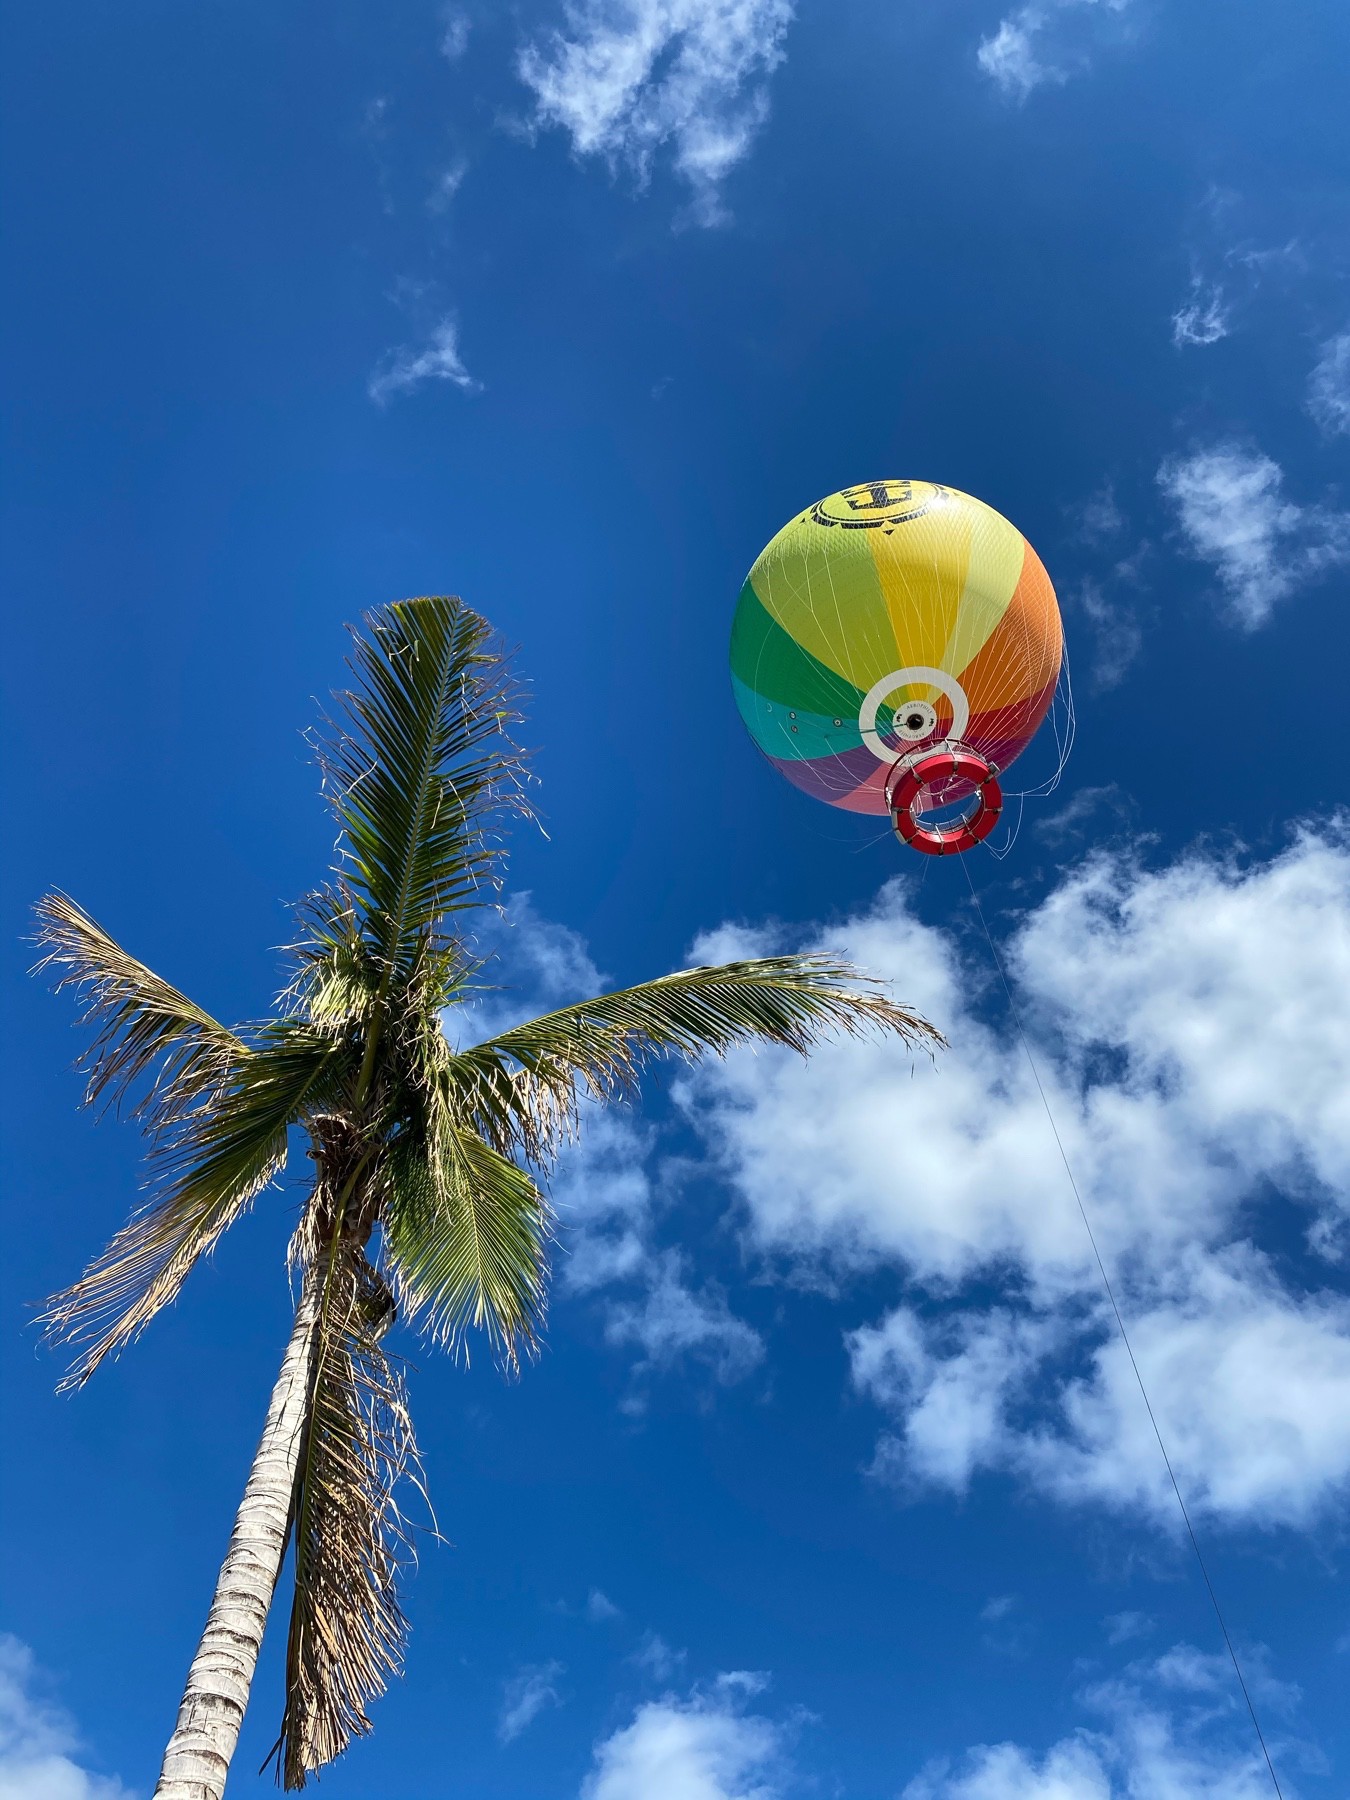 A hot air balloon sits atop the upper right corner against a bright, blue sky with a palm tree sprouting up from the bottom left corner.